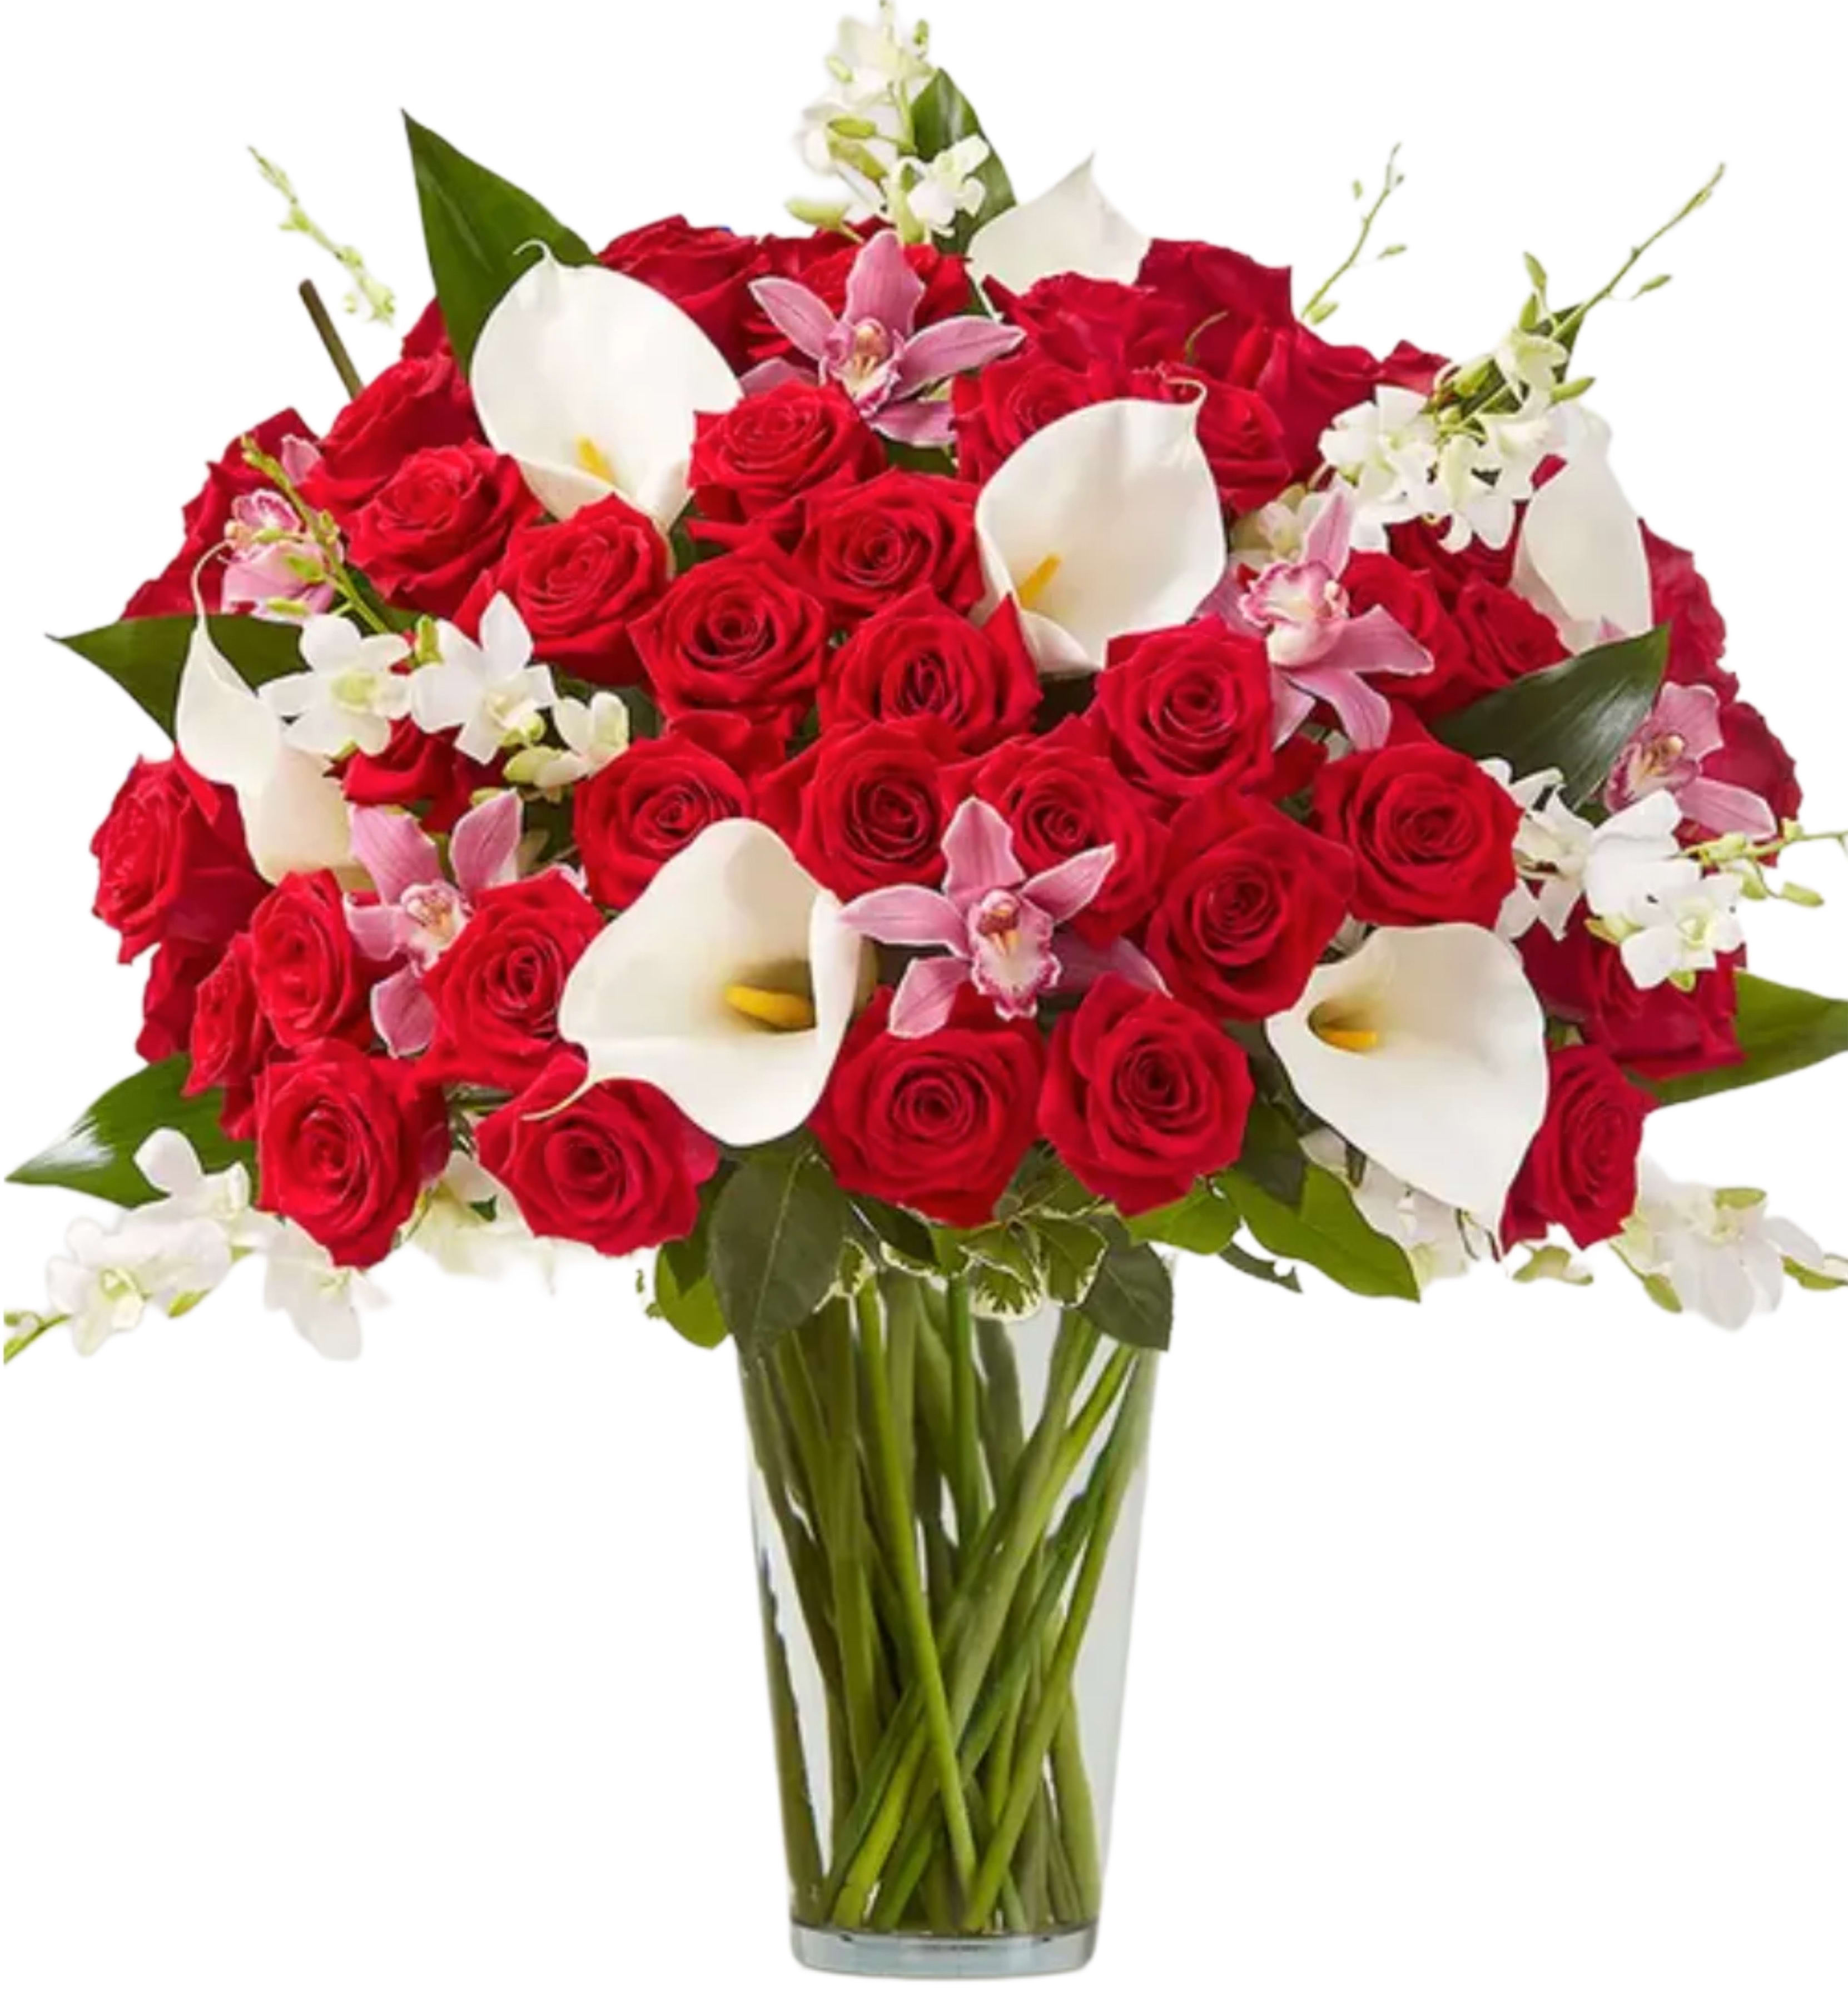 Elegant Extravagance™ Bouquet - The ultimate Valentine’s WOW gift! Our extravagant arrangement towers over two feet tall, featuring a gathering of roses, orchids and calla lilies in striking shades of red, pink and white. Accented by lush and textural greenery, it’s artistically designed in a clear glass vase to let the beauty of each bloom stand out. When it comes to surprising the one you love, this is truly the most unforgettable gift you can send. All-around arrangement with red roses; white calla lilies and Dendrobium orchids; pink cymbidium orchids; accented with aspidistra leaf and assorted greenery Artistically designed in a clear glass vase